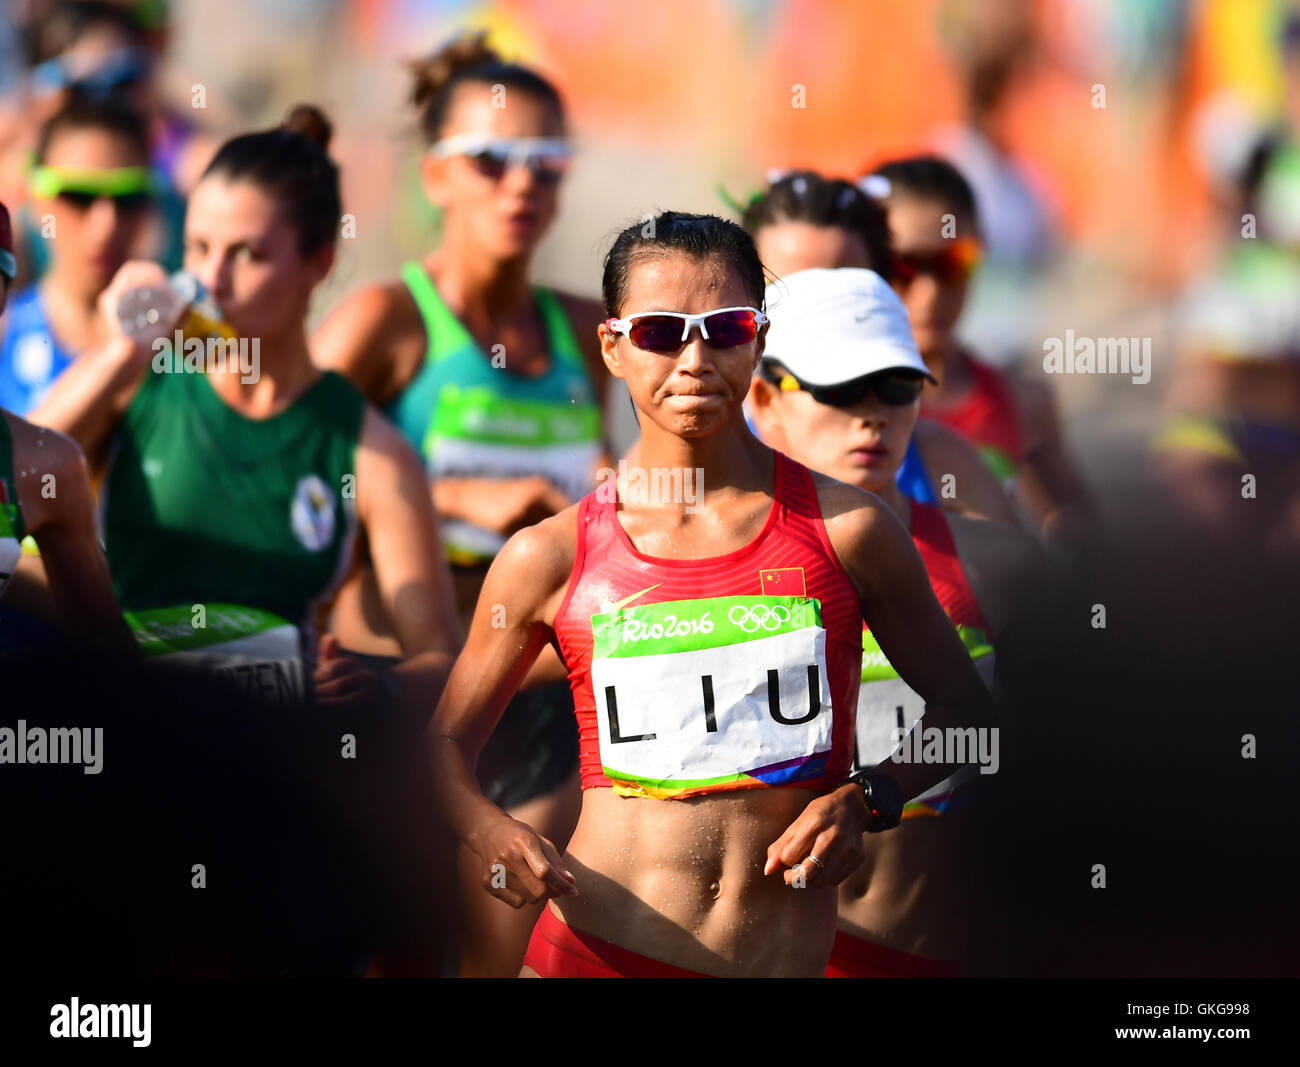 Rio de Janeiro, Brazil. 19th August, 2016. Hong LIU of China during the womens 20km race walk on Day 14 of the 2016 Rio Olympics at Pontal on August 19, 2016 in Rio de Janeiro, Brazil. (Photo by Roger Sedres/Gallo Images) Credit:  Roger Sedres/Alamy Live News Stock Photo